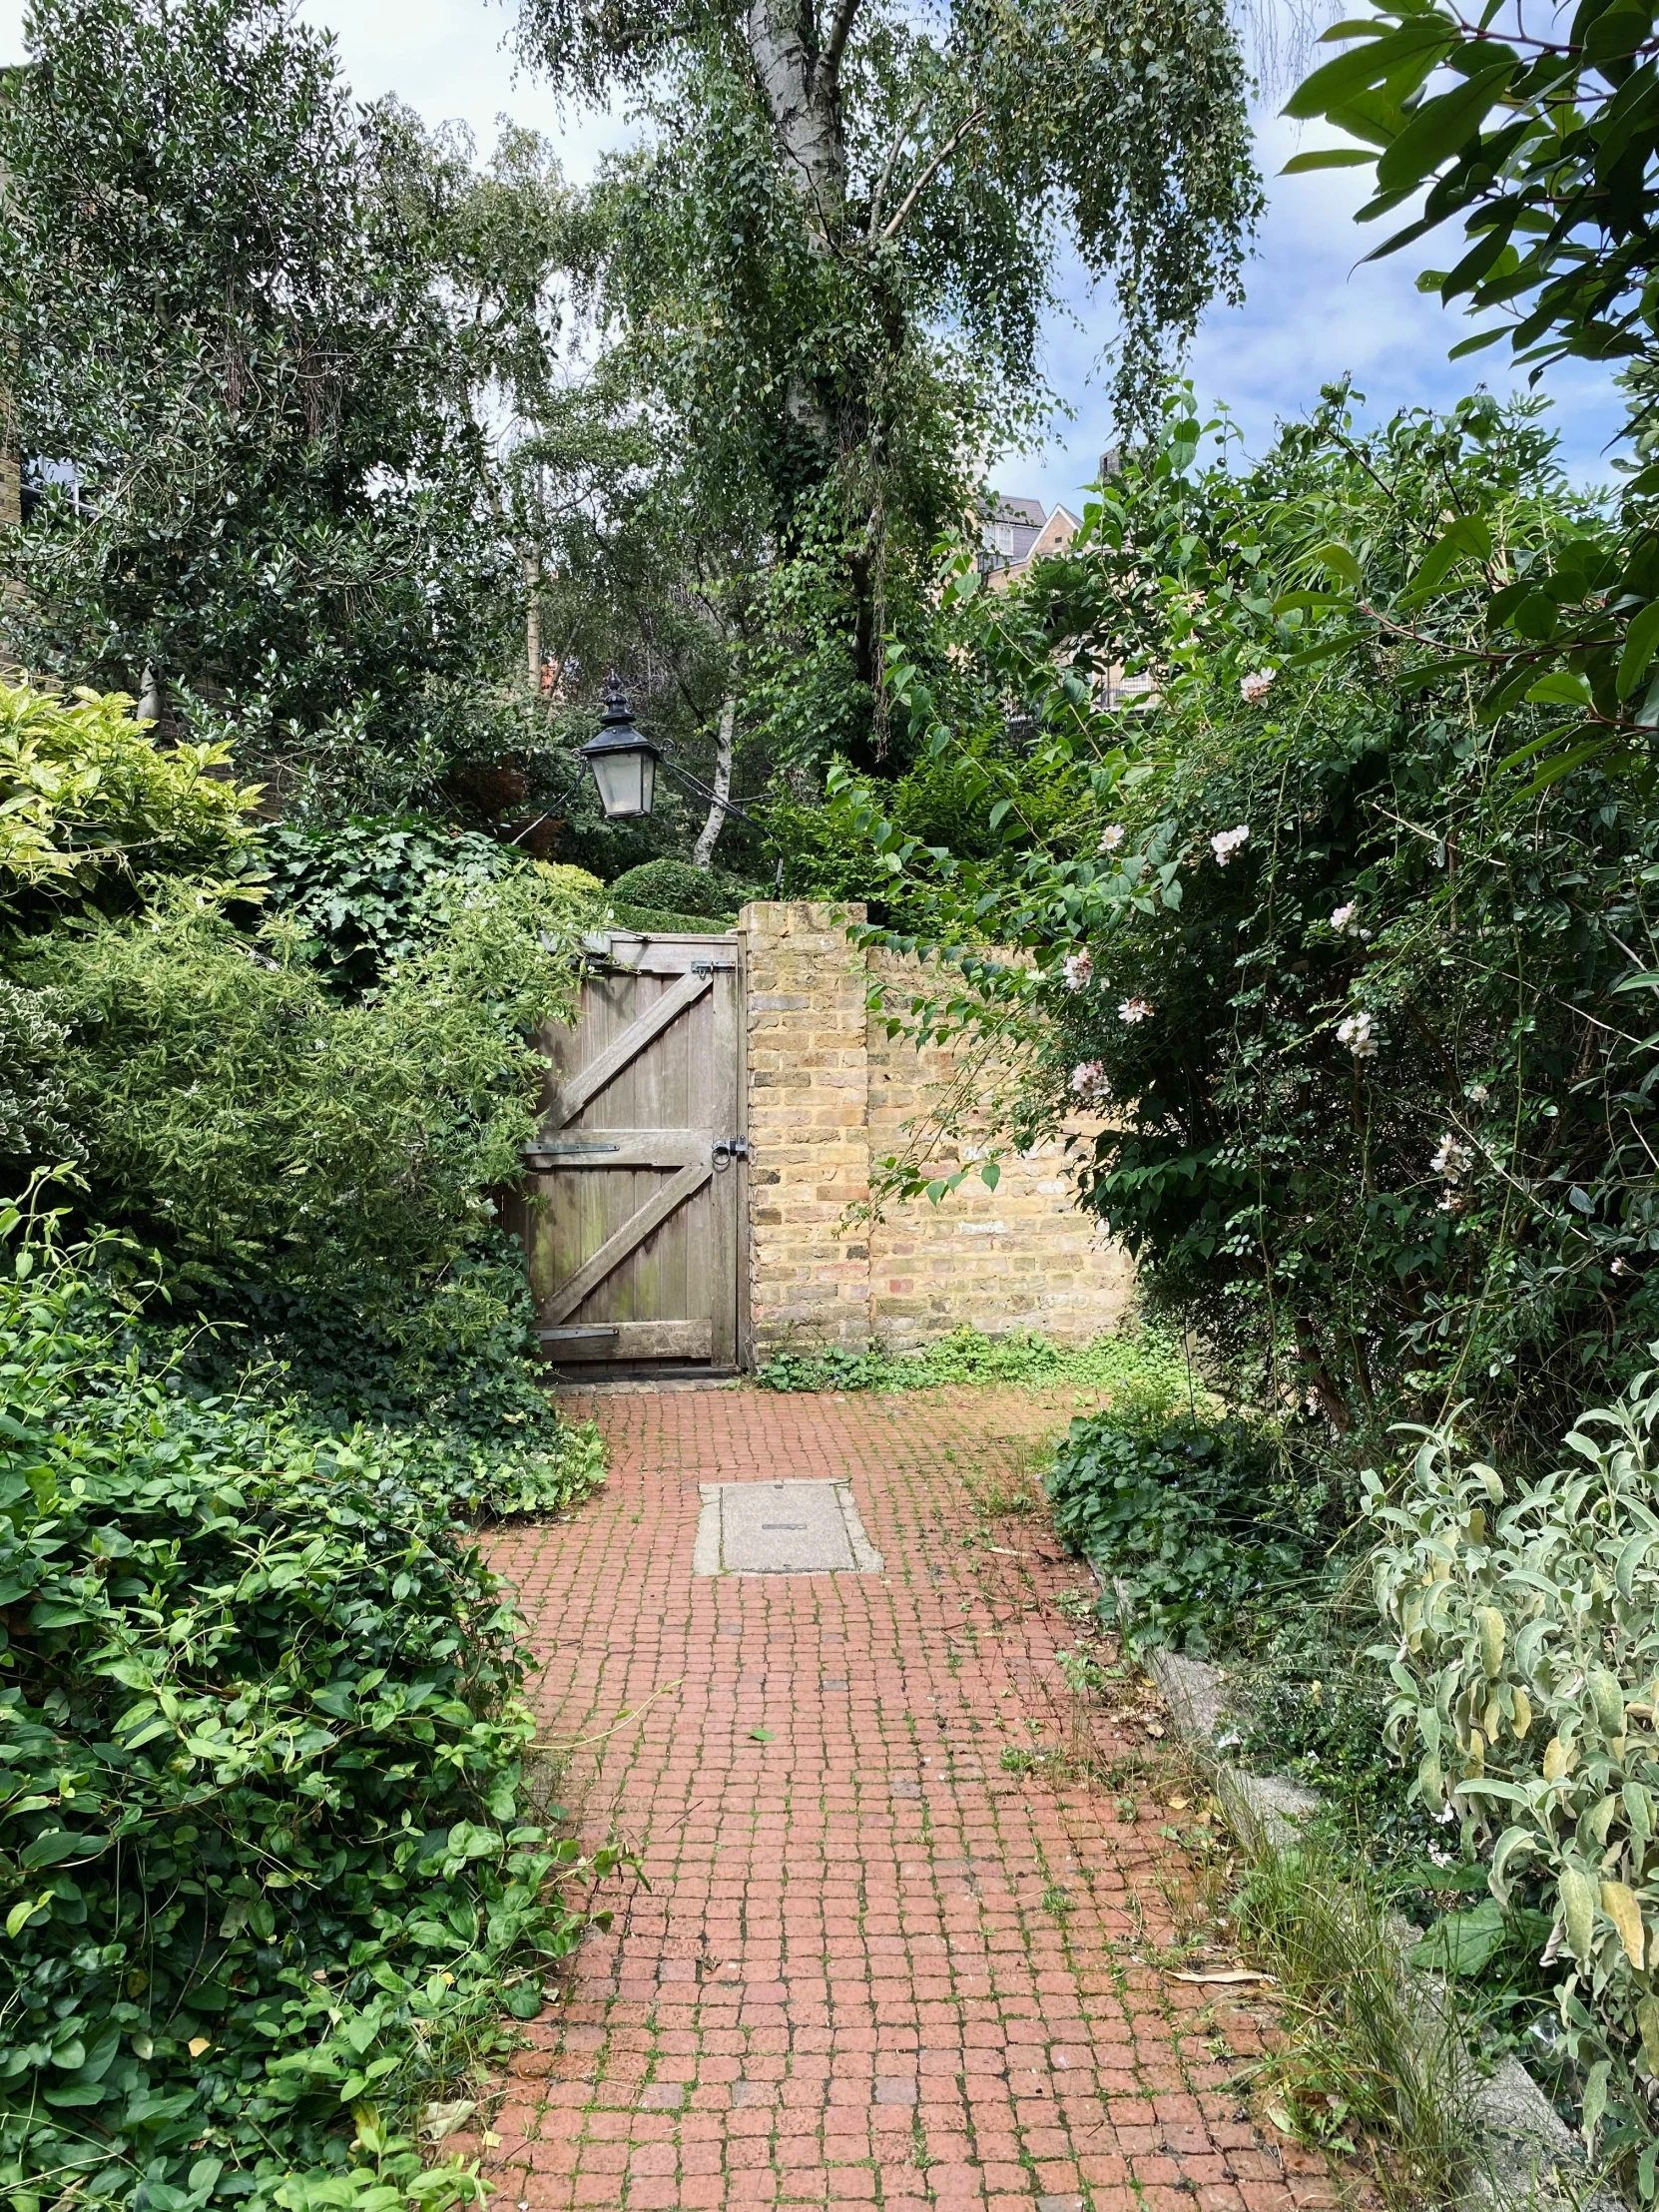 brick pathway in green shrubbery, with wooden gate